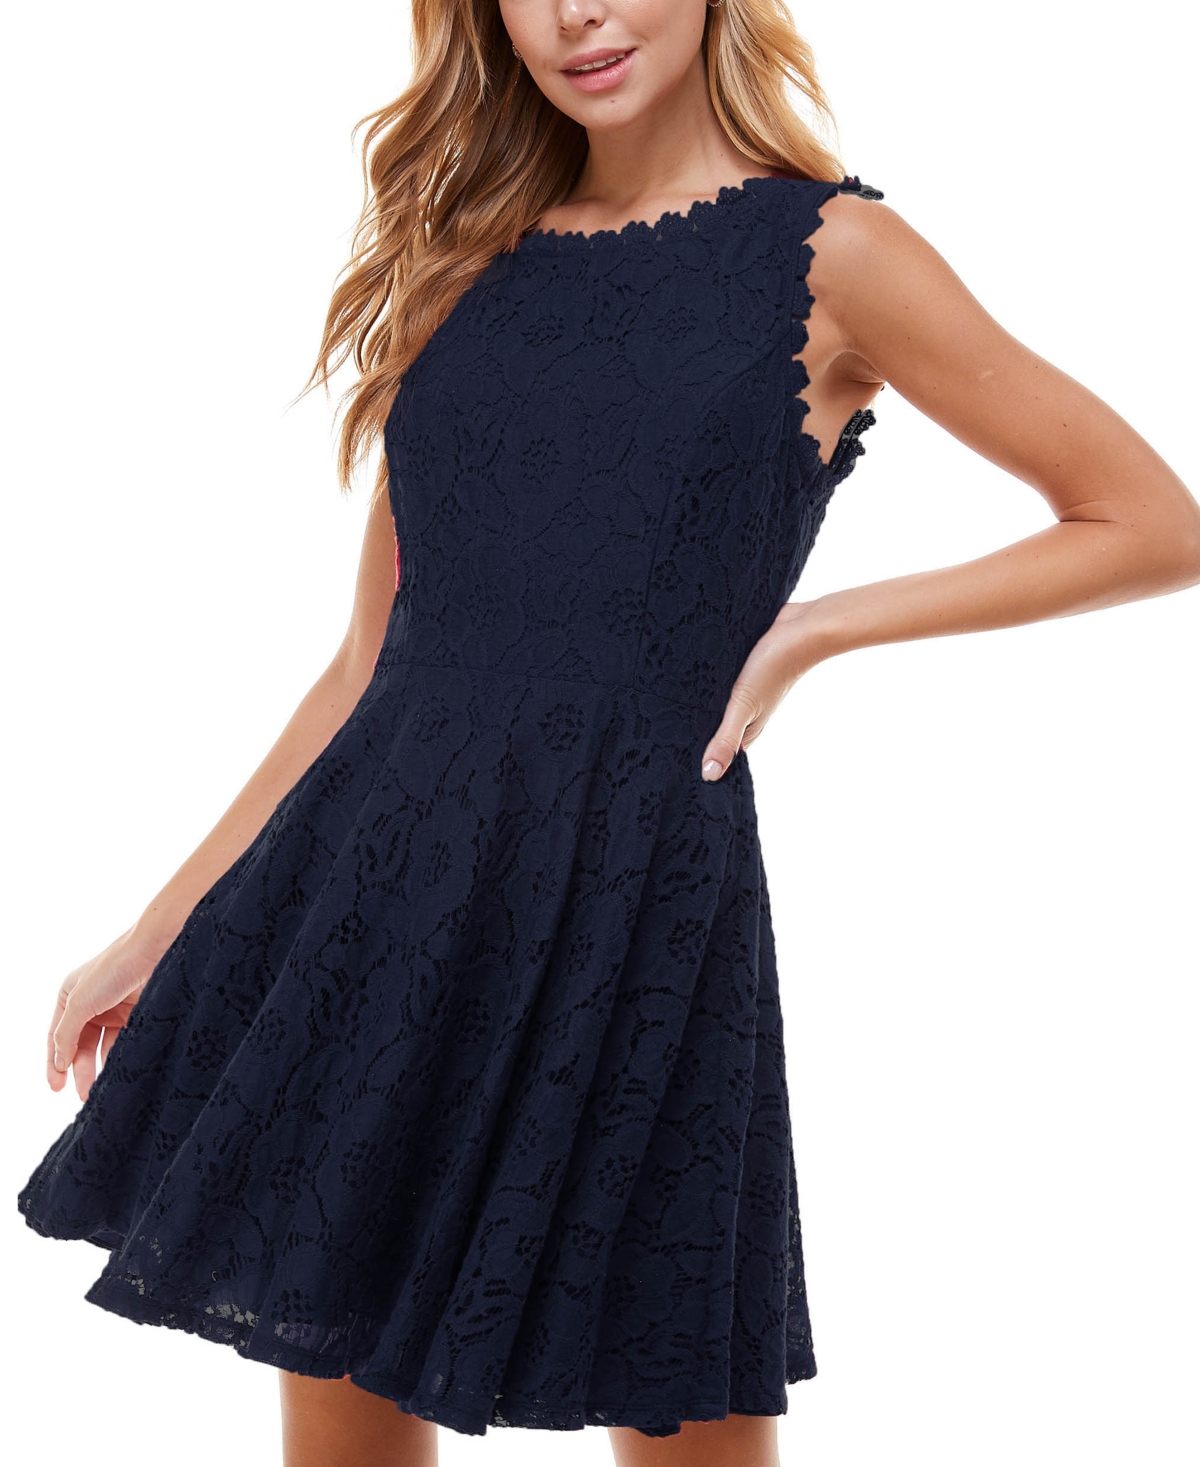 Juniors' Lace Fit & Flare Dress - Navy